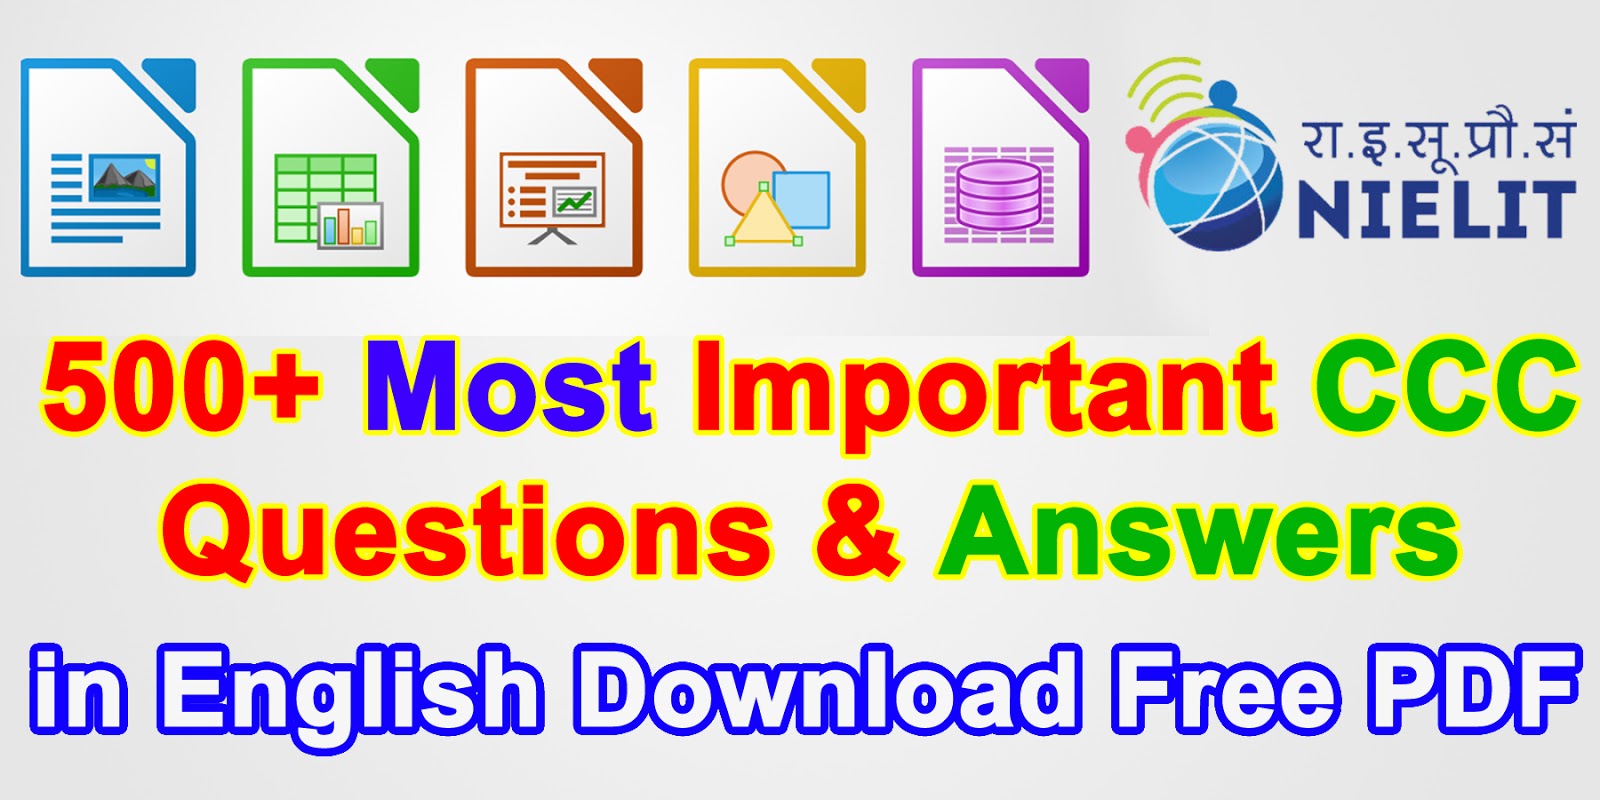 The five most important questions pdf free download pdf